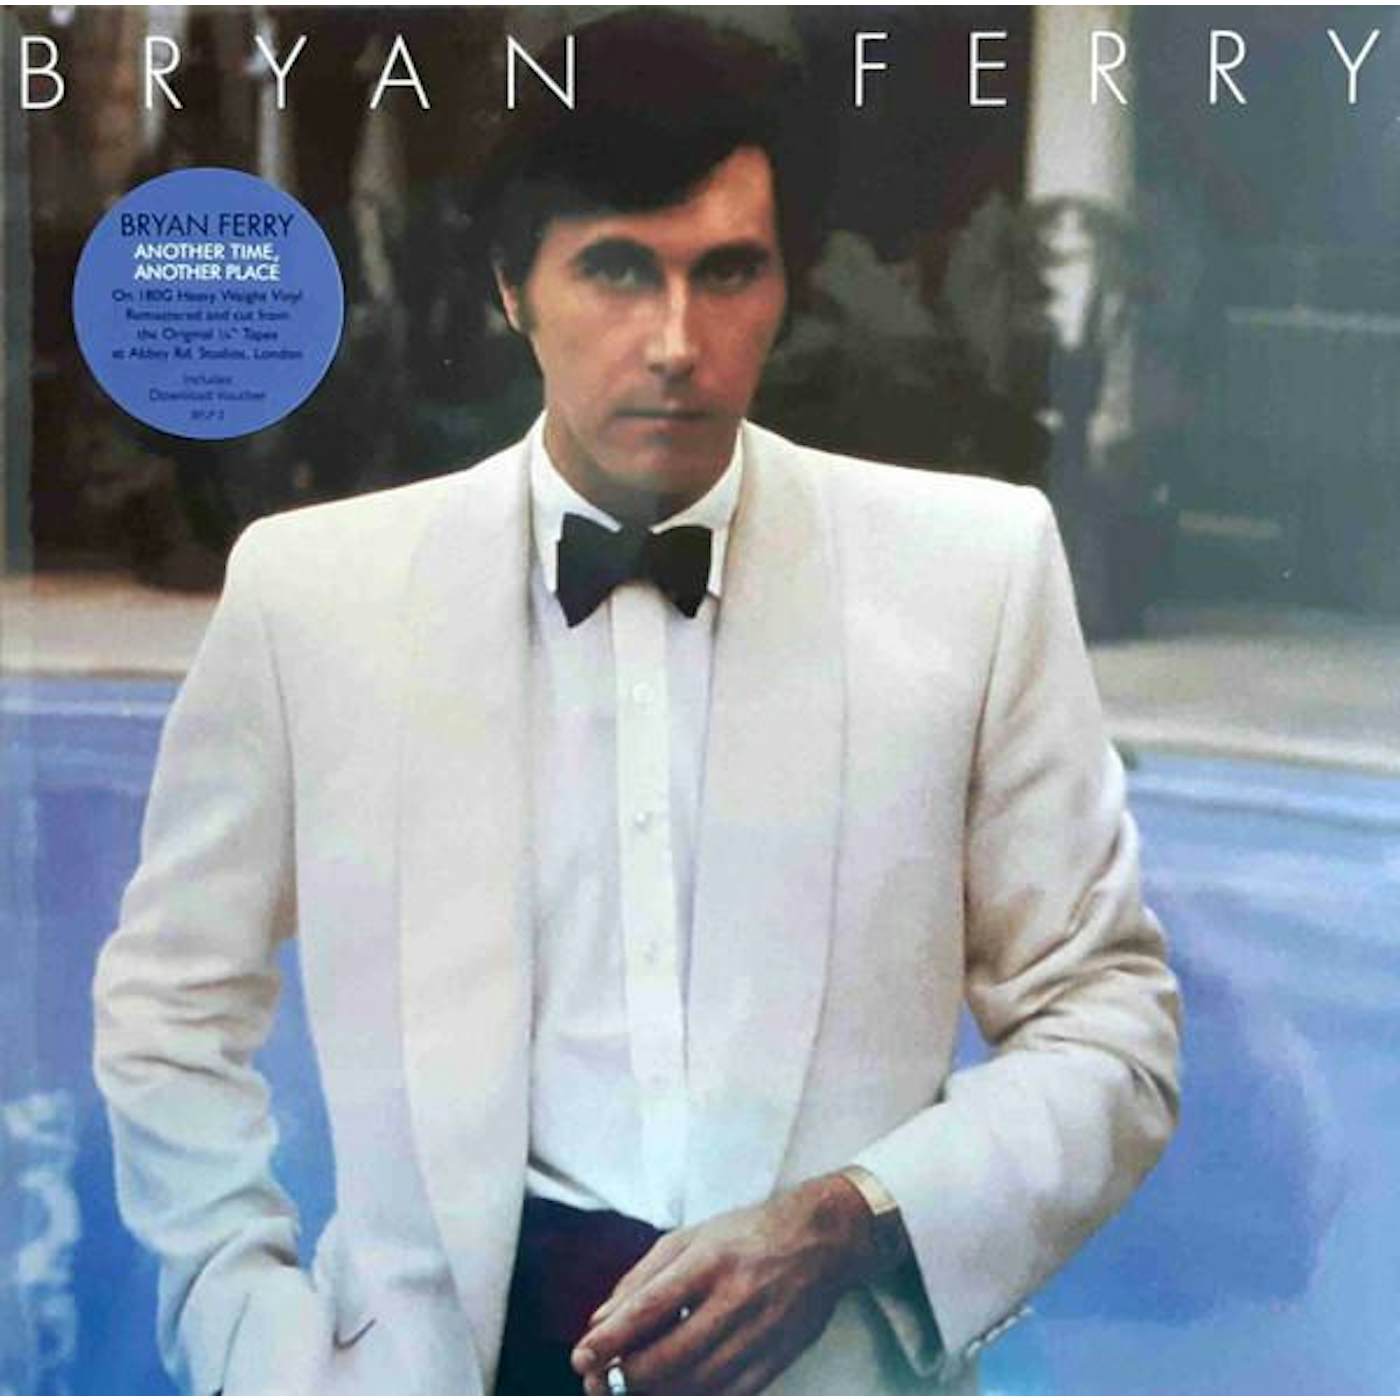 Bryan Ferry ANOTHER TIME / PLACE (180G/IMPORT) Vinyl Record